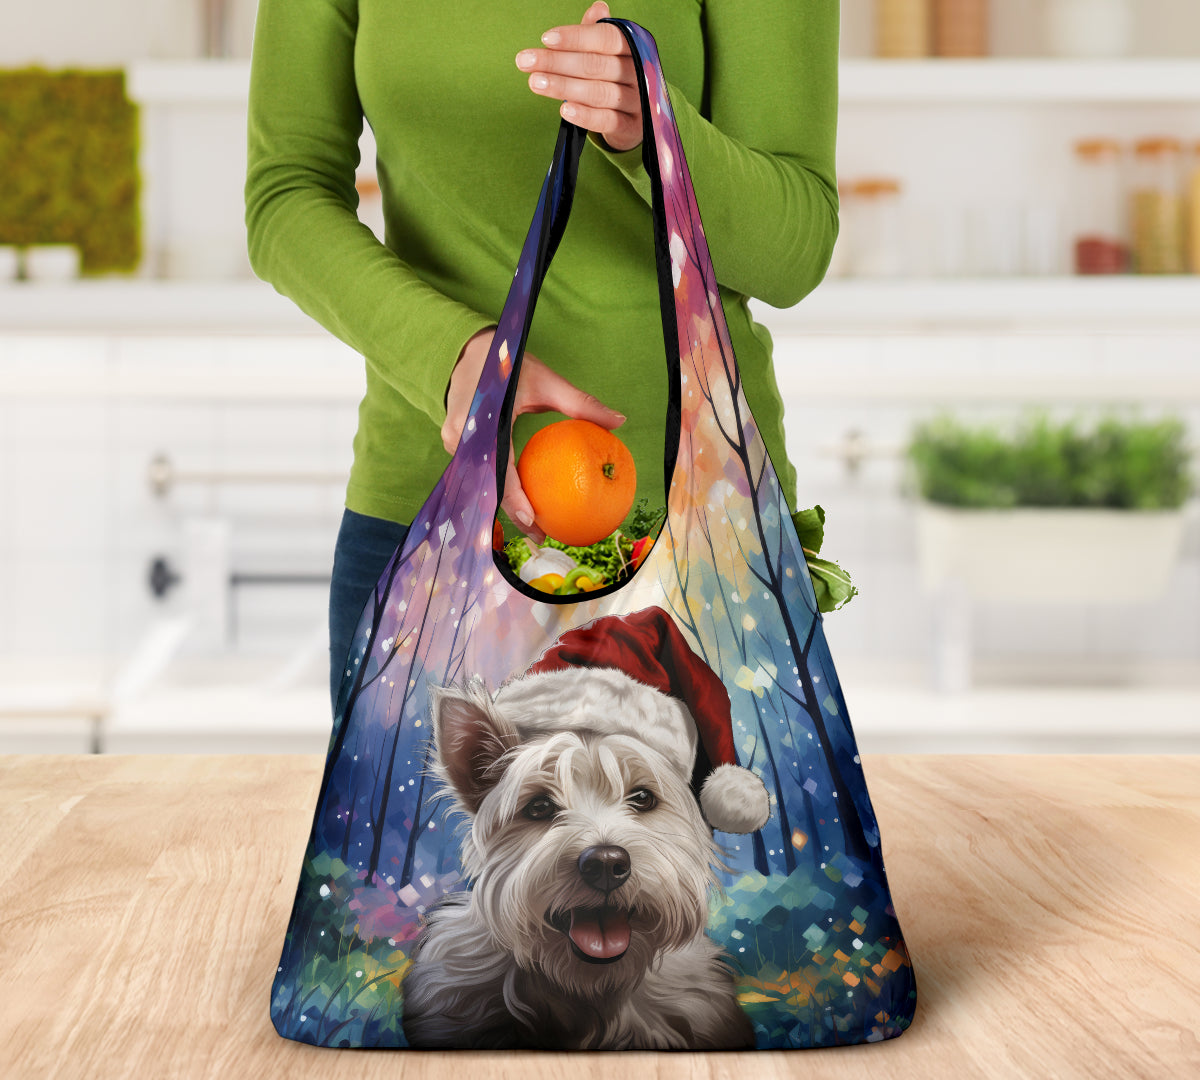 Westie Design 3 Pack Grocery Bags - 2023 Holiday - Christmas Print